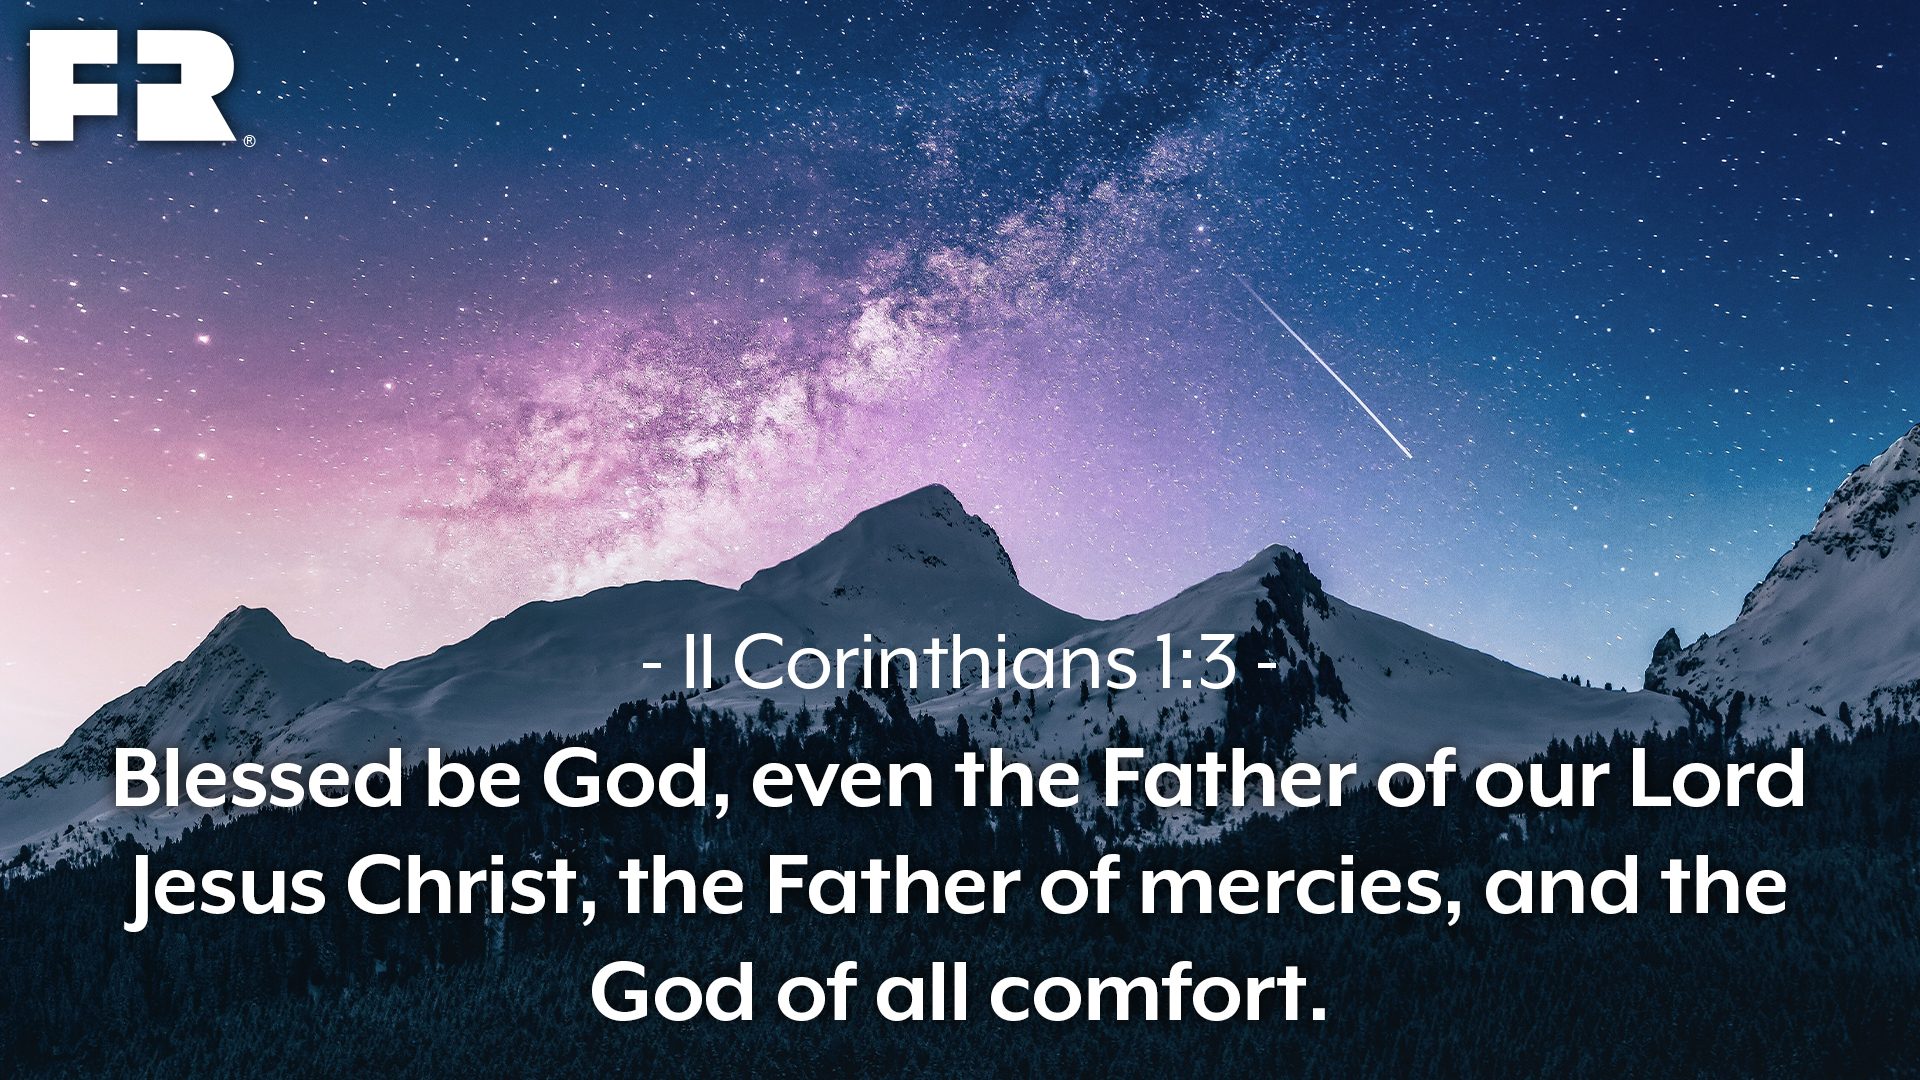 “Blessed be God, even the Father of our Lord Jesus Christ, the Father of mercies, and the God of all comfort.”